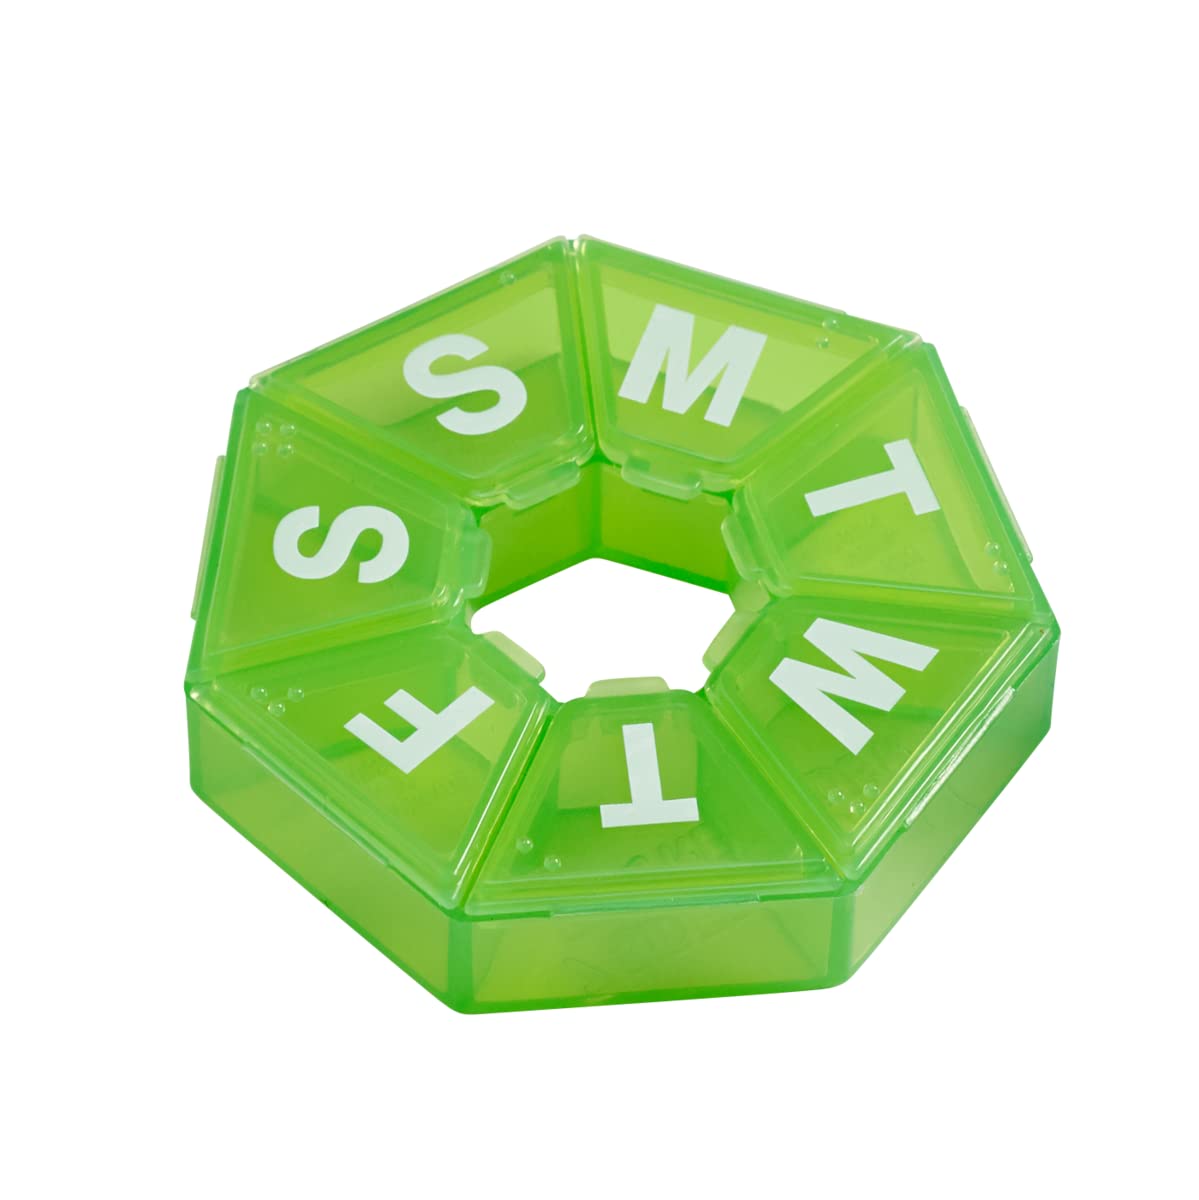 EZY DOSE Weekly Pill Organizer and Planner, Travel Pill Planner, 7-Sided, Green (67009GAMT)